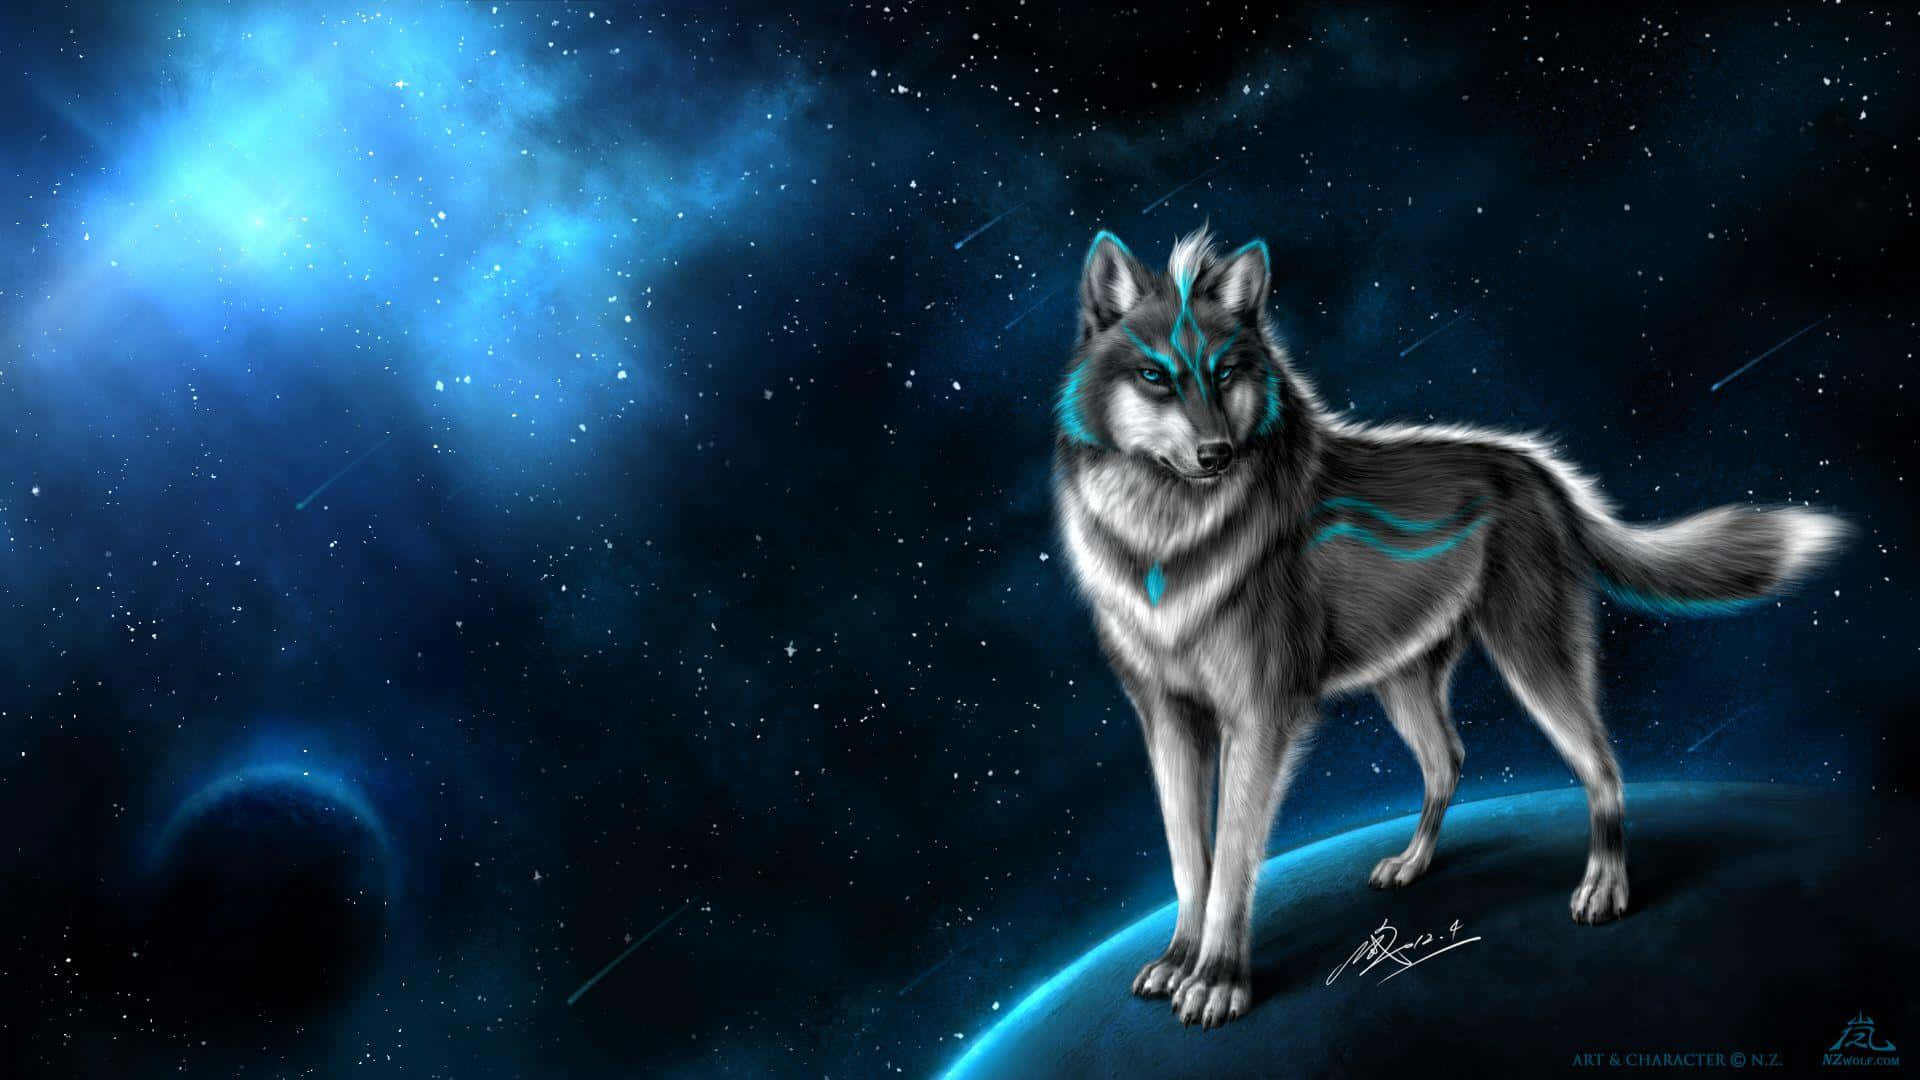 A wild Fire Wolf howls in the night sky. Wallpaper